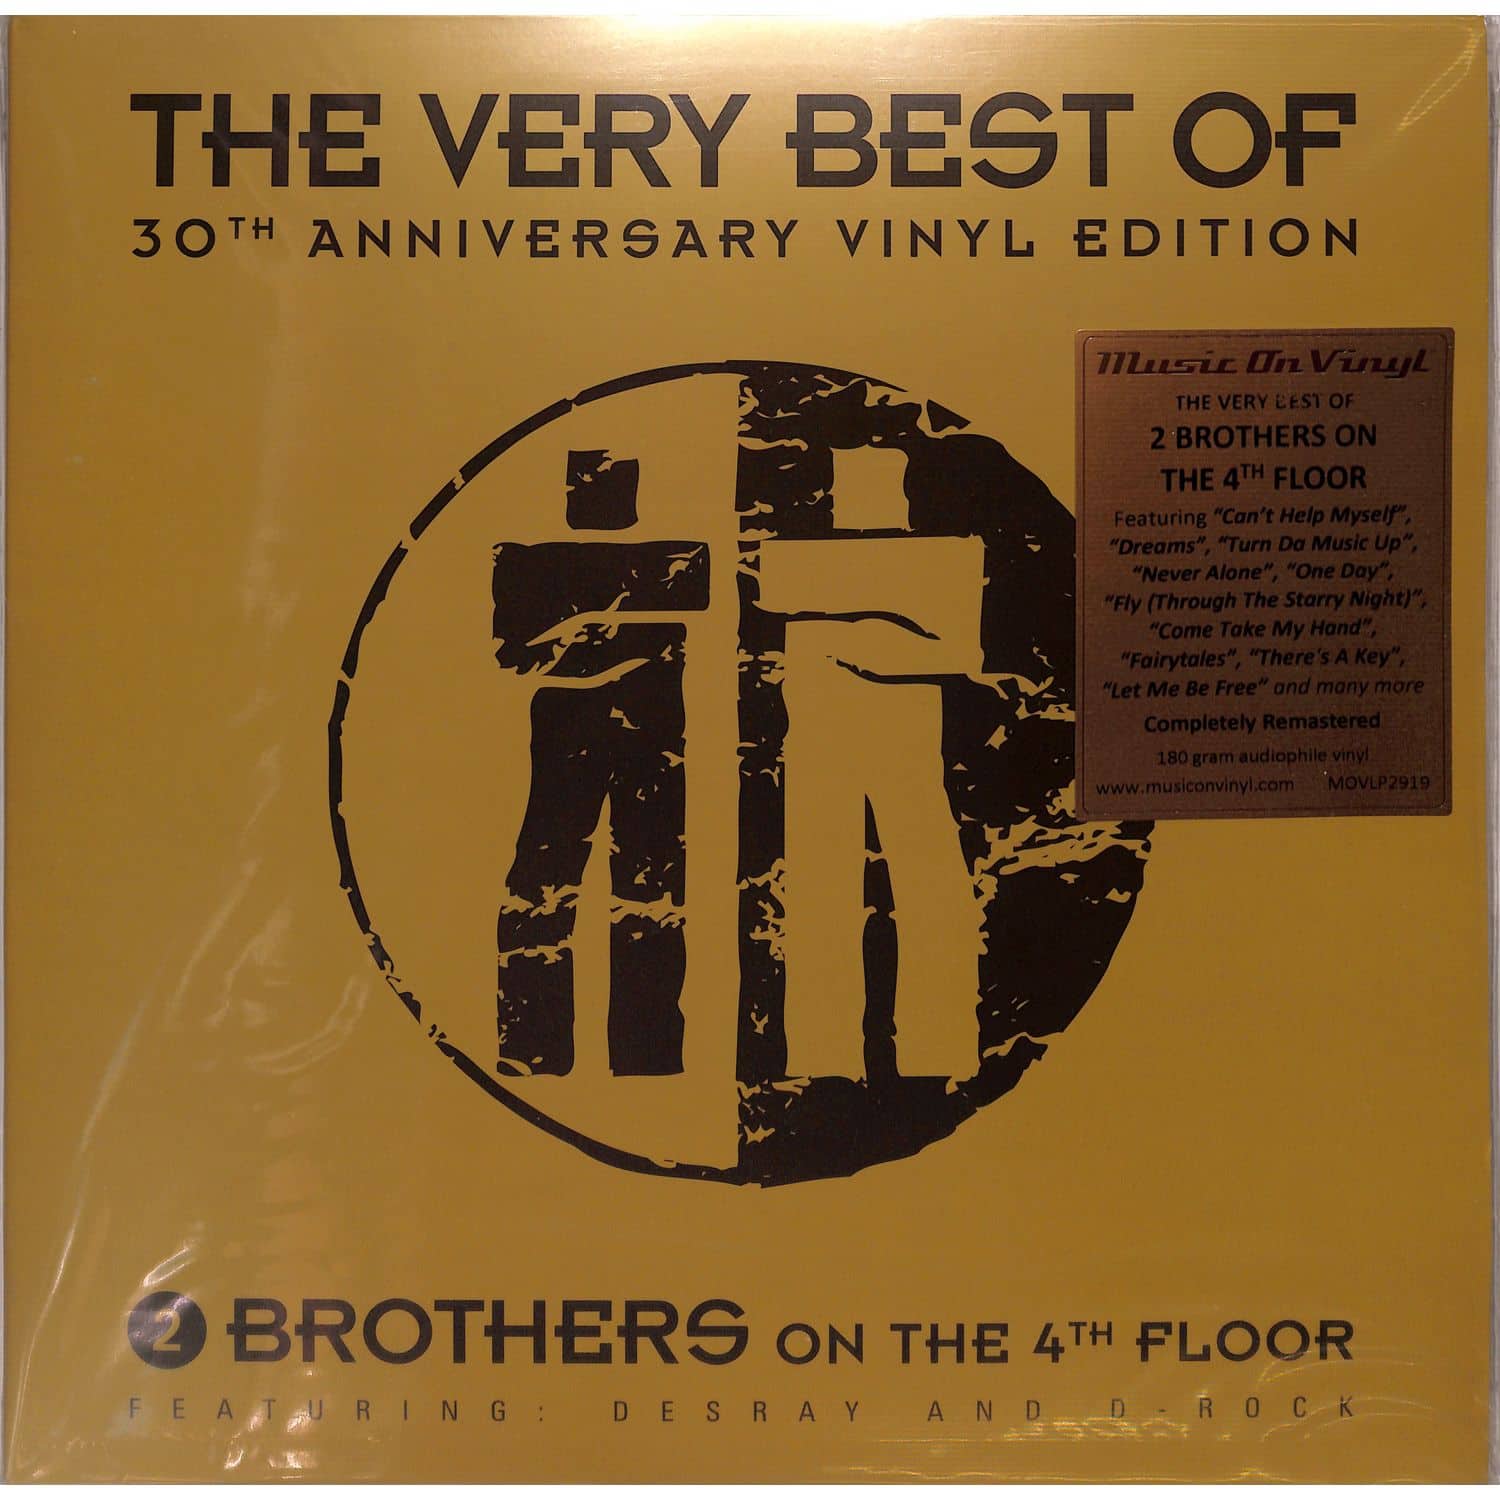 Two Brothers On The 4th Floor - VERY BEST OF 